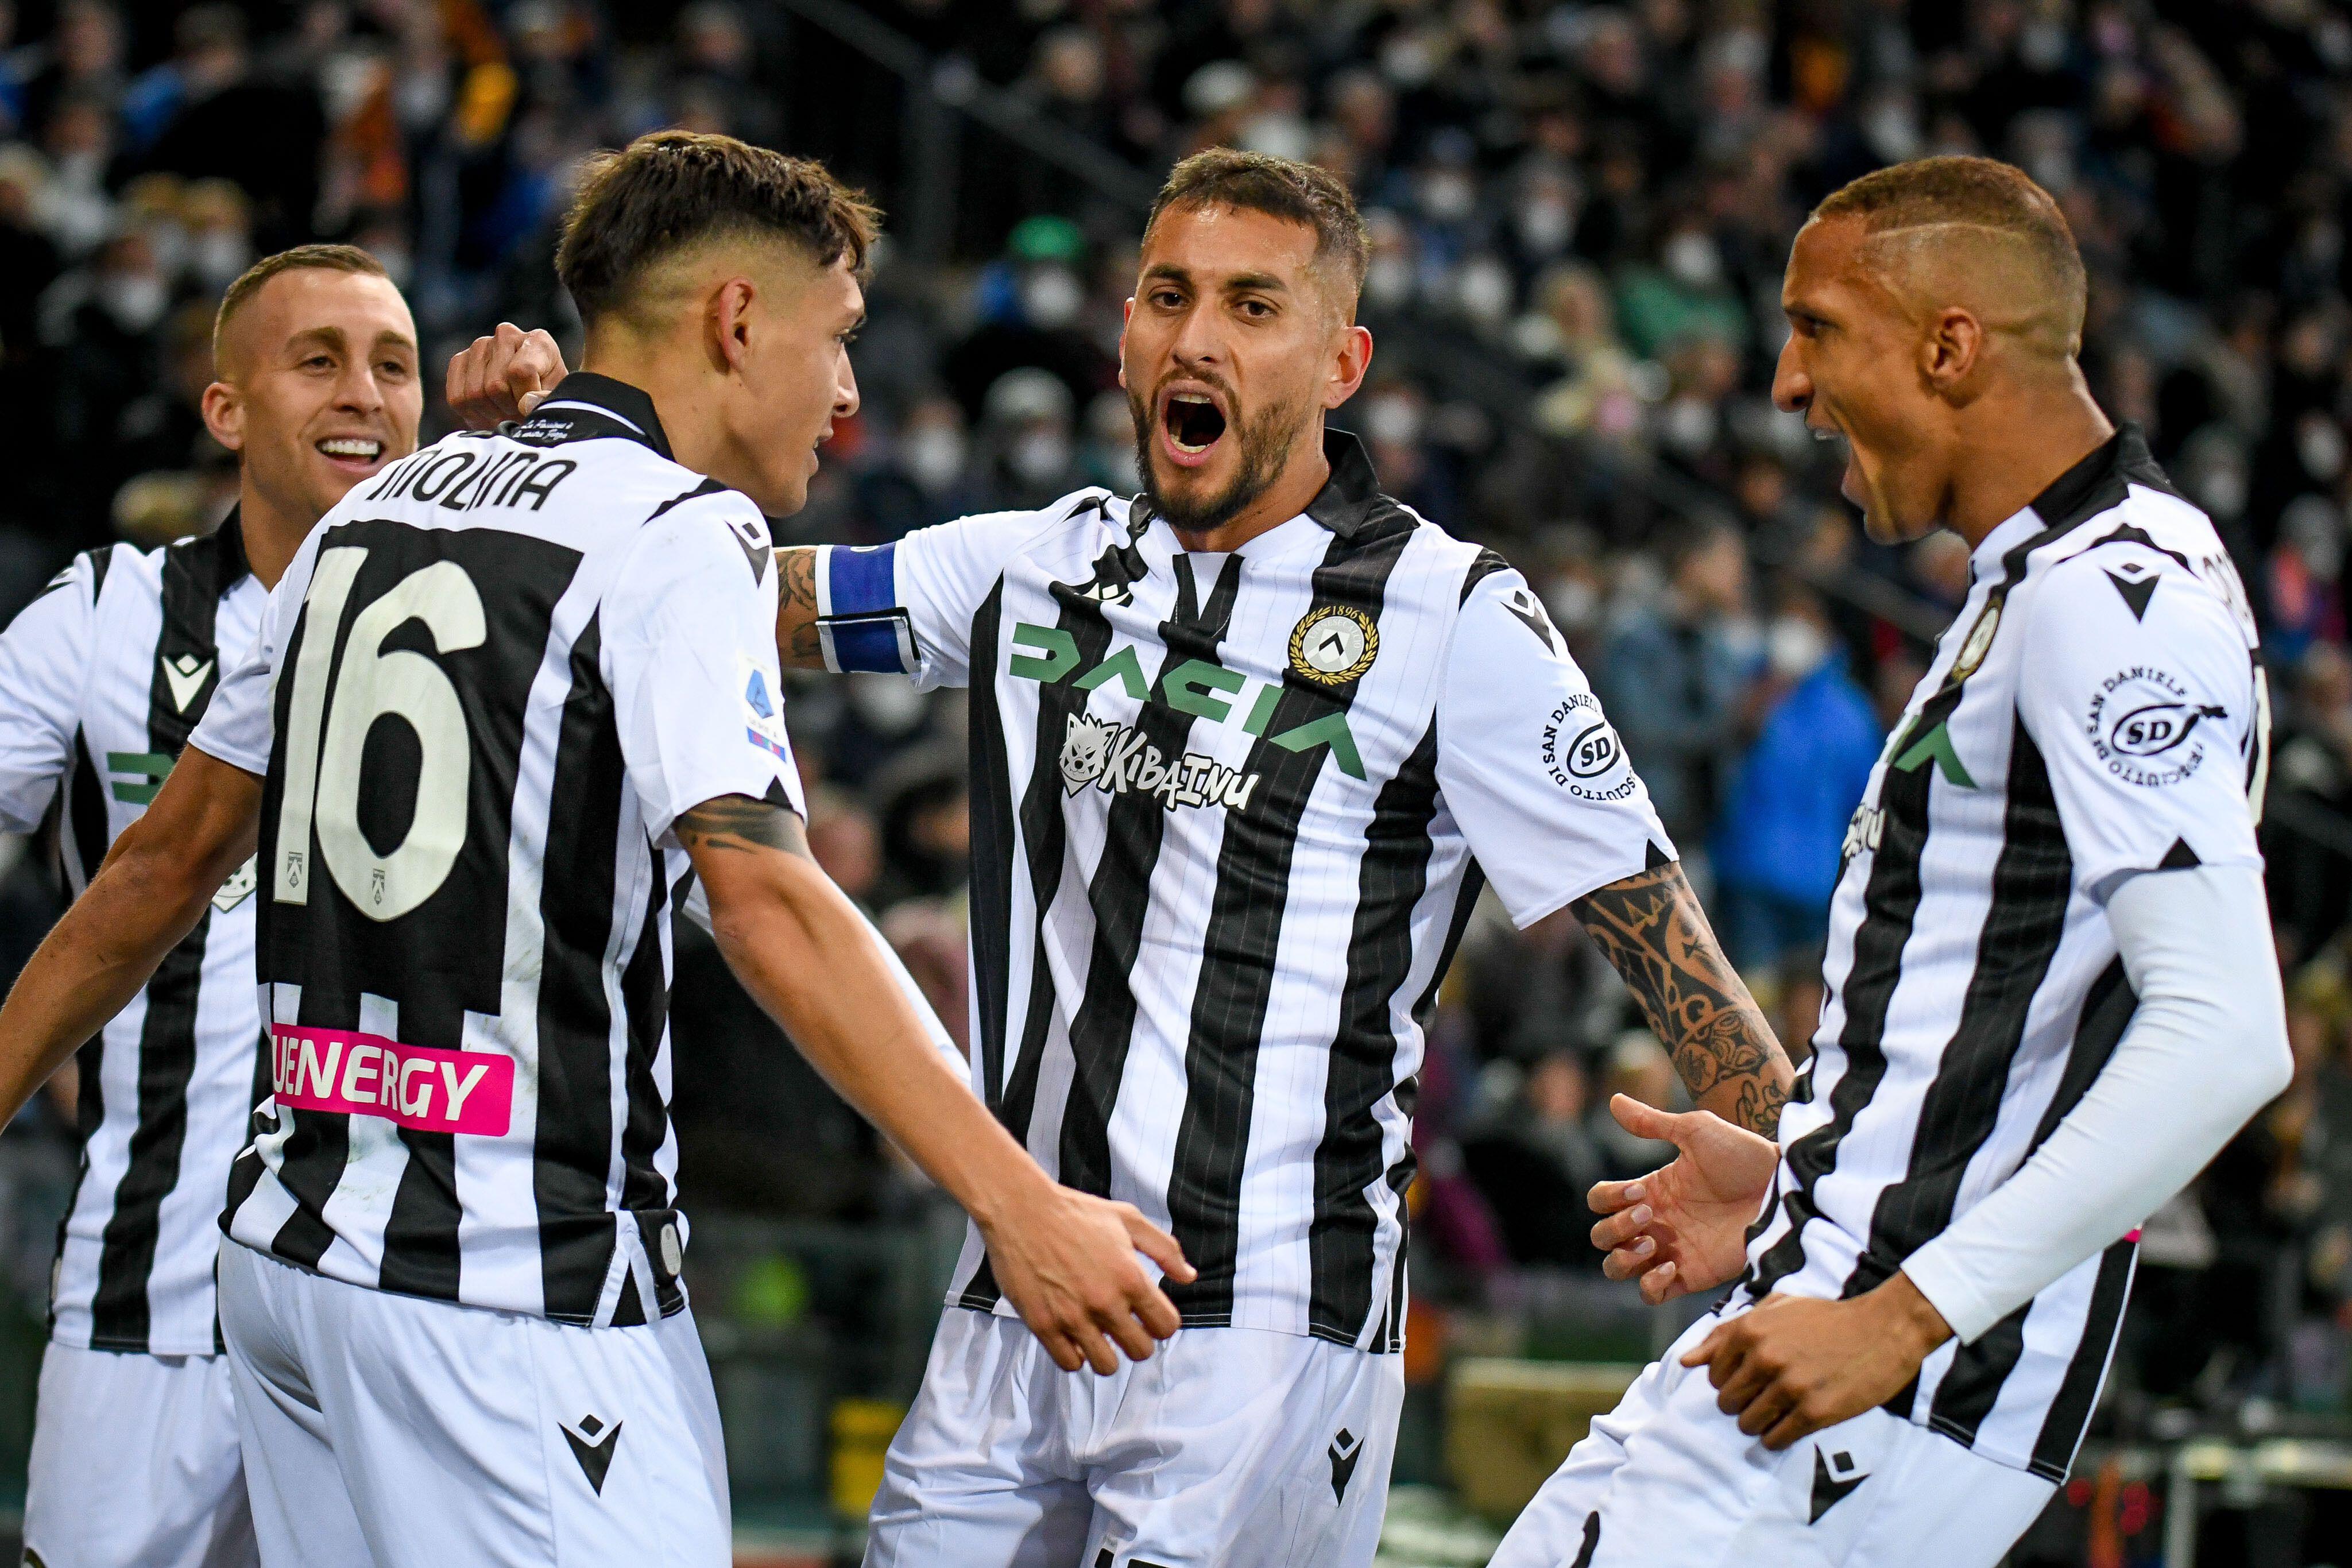 udinese v catania betting preview on betfair